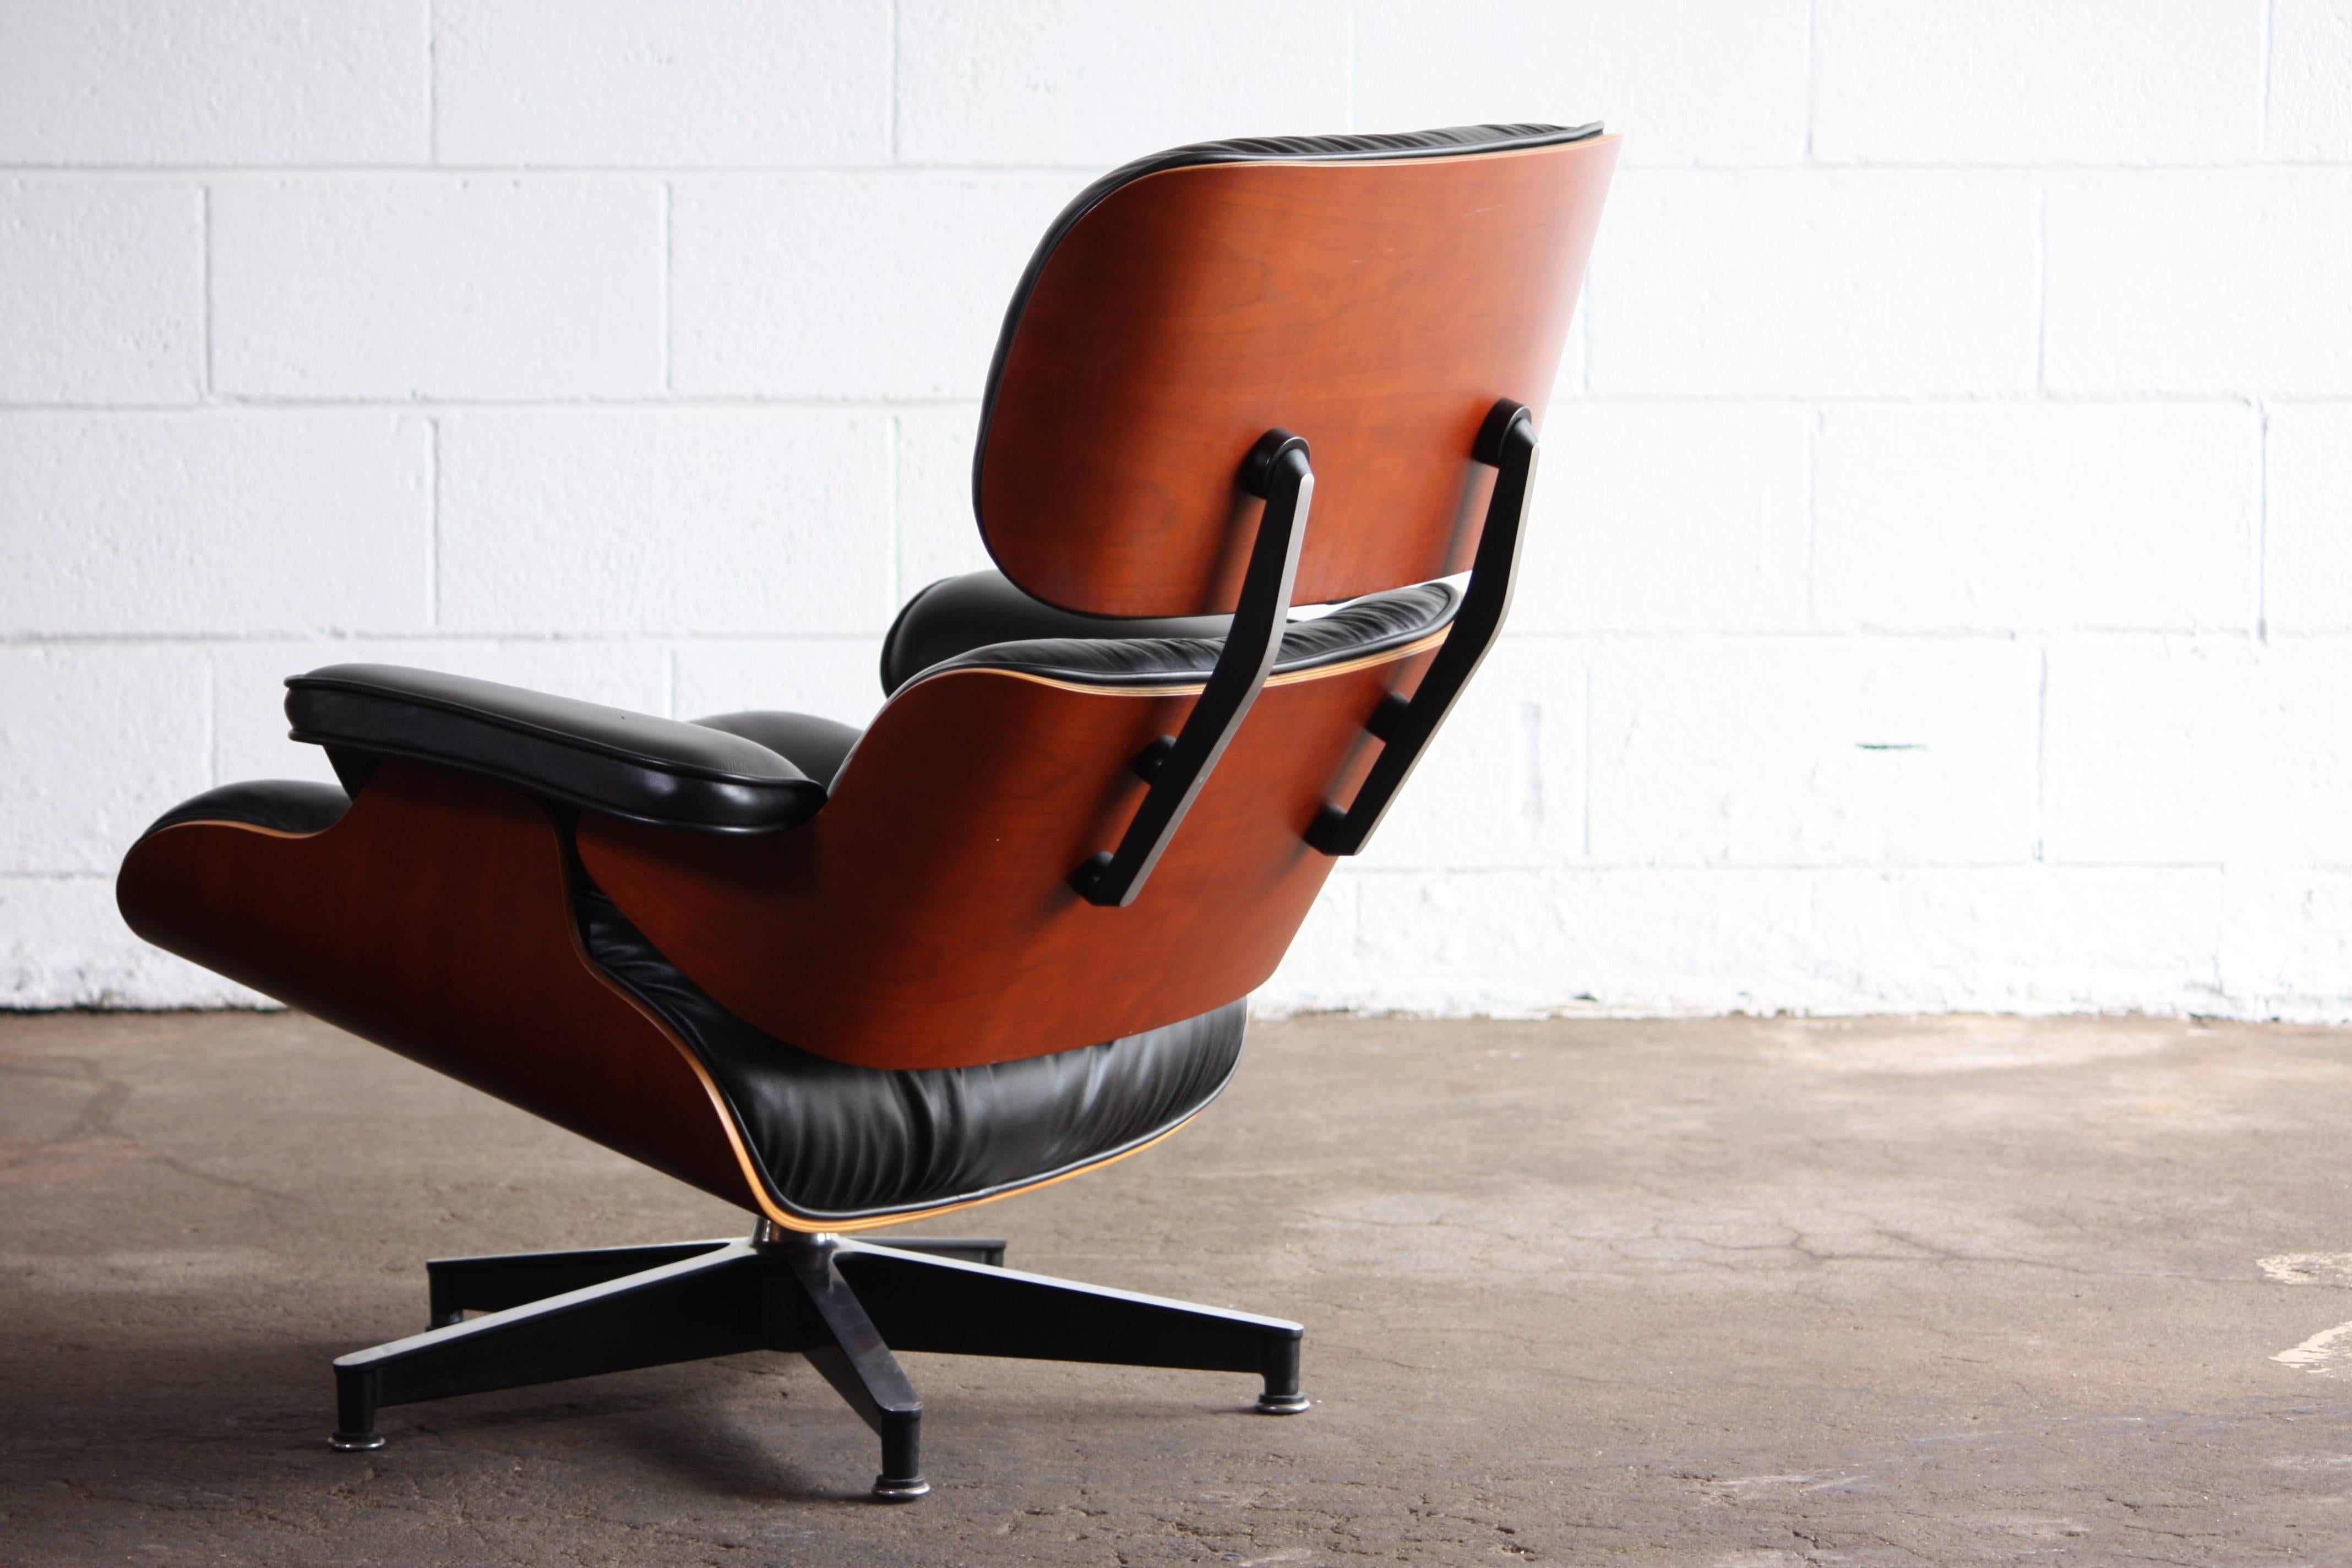 The iconic lounge chair. A must have in any modern interior. Gorgeous cheerywood and black leather.